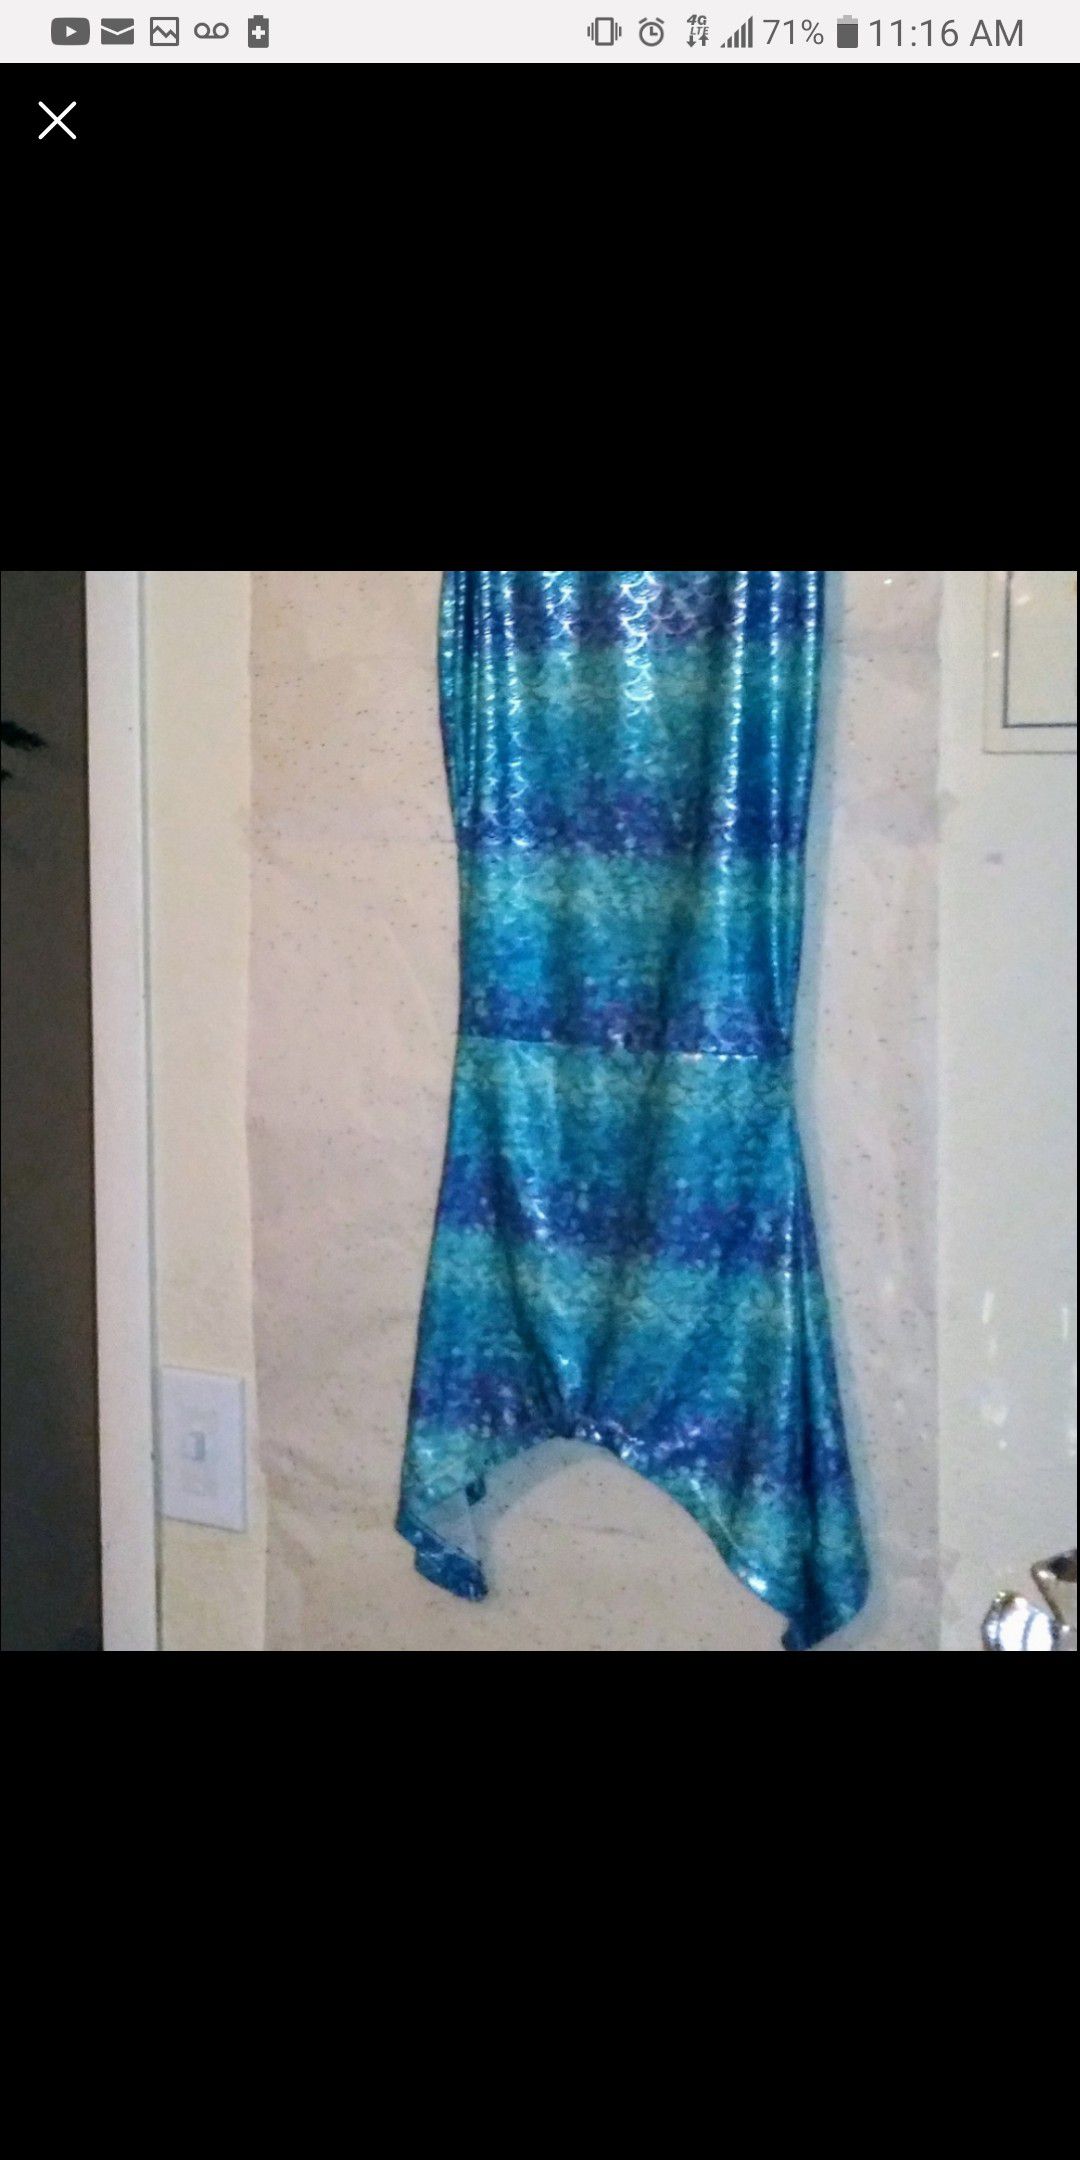 Justice Mermaid tail Swim Cover-up